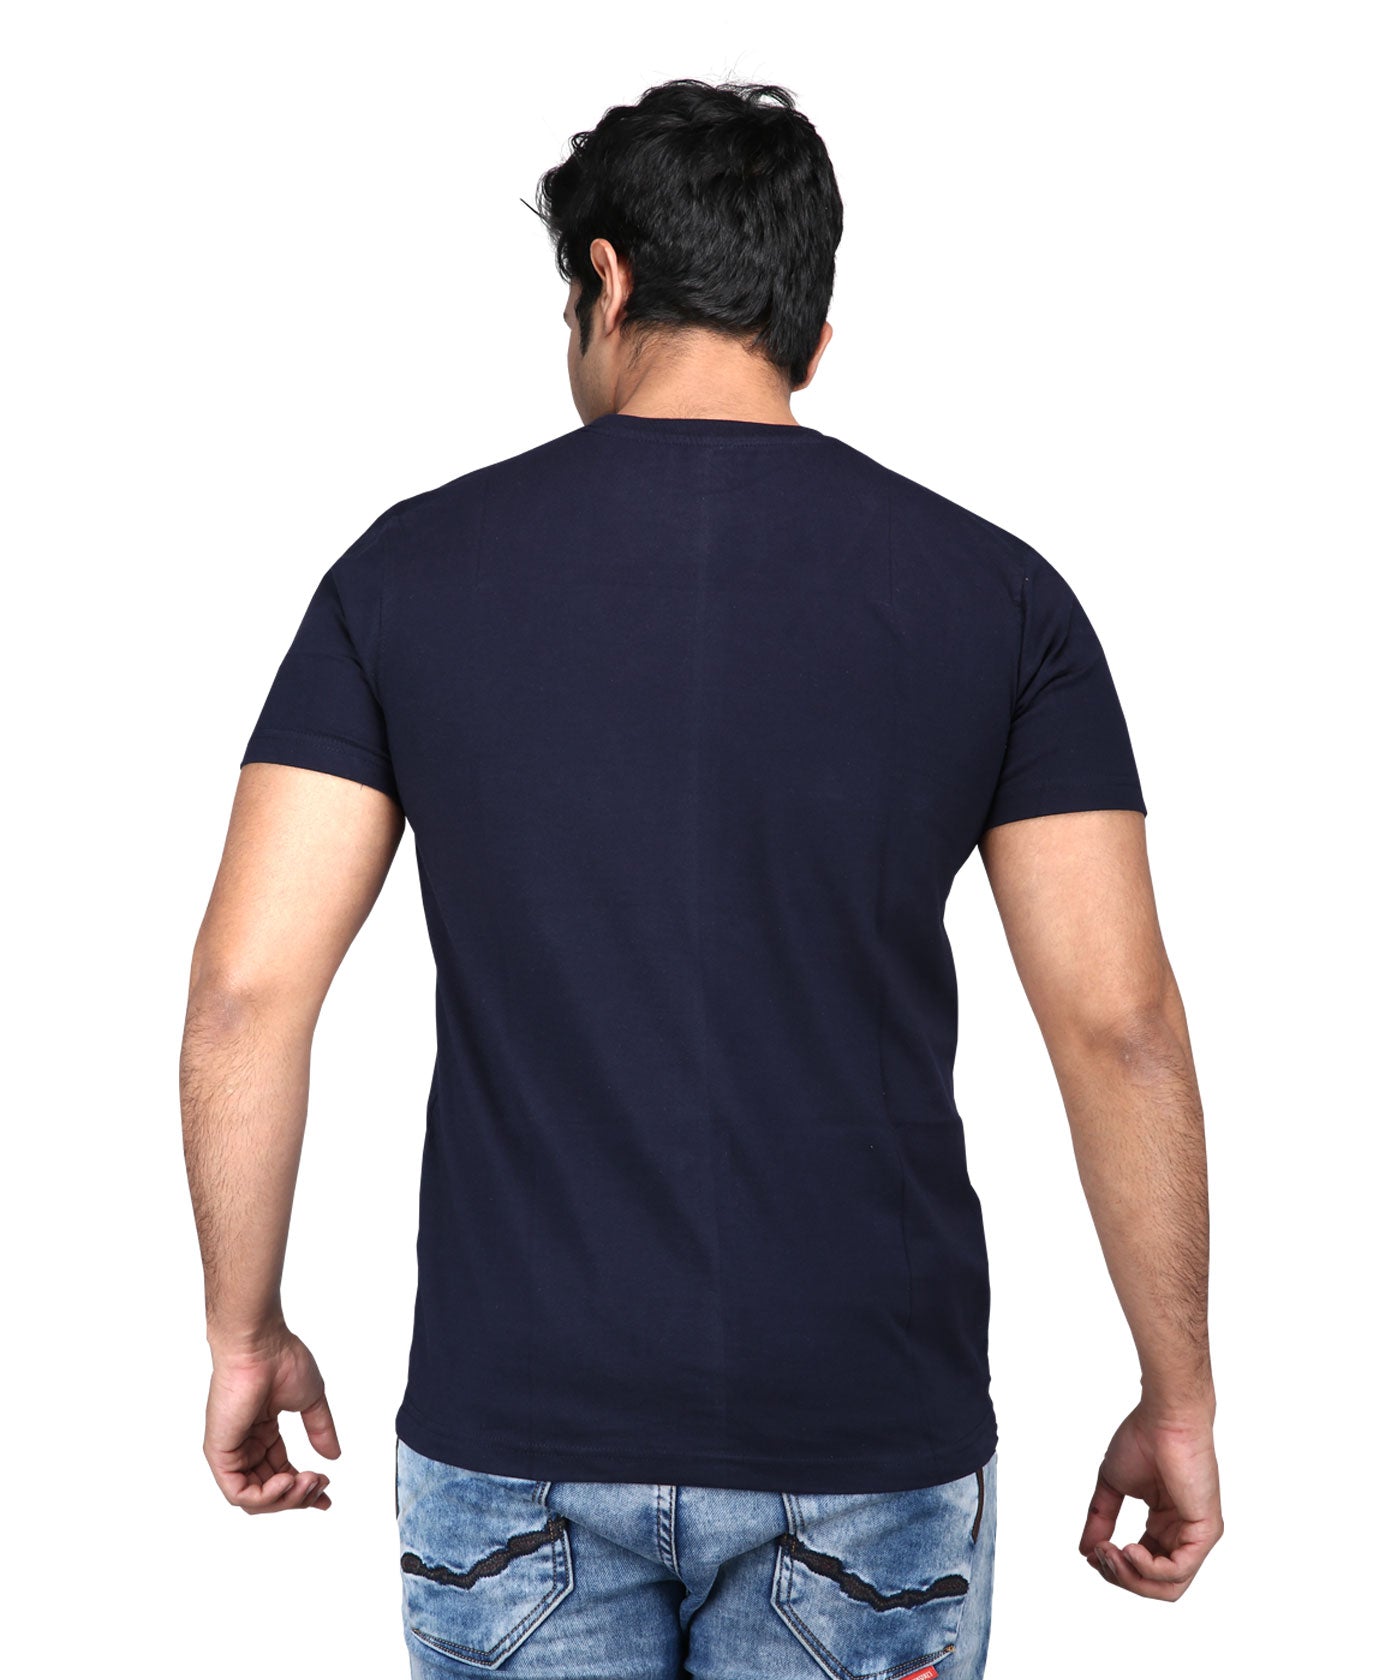 Right Thoughts - Premium Round Neck Cotton Tees for Men - Navy Blue